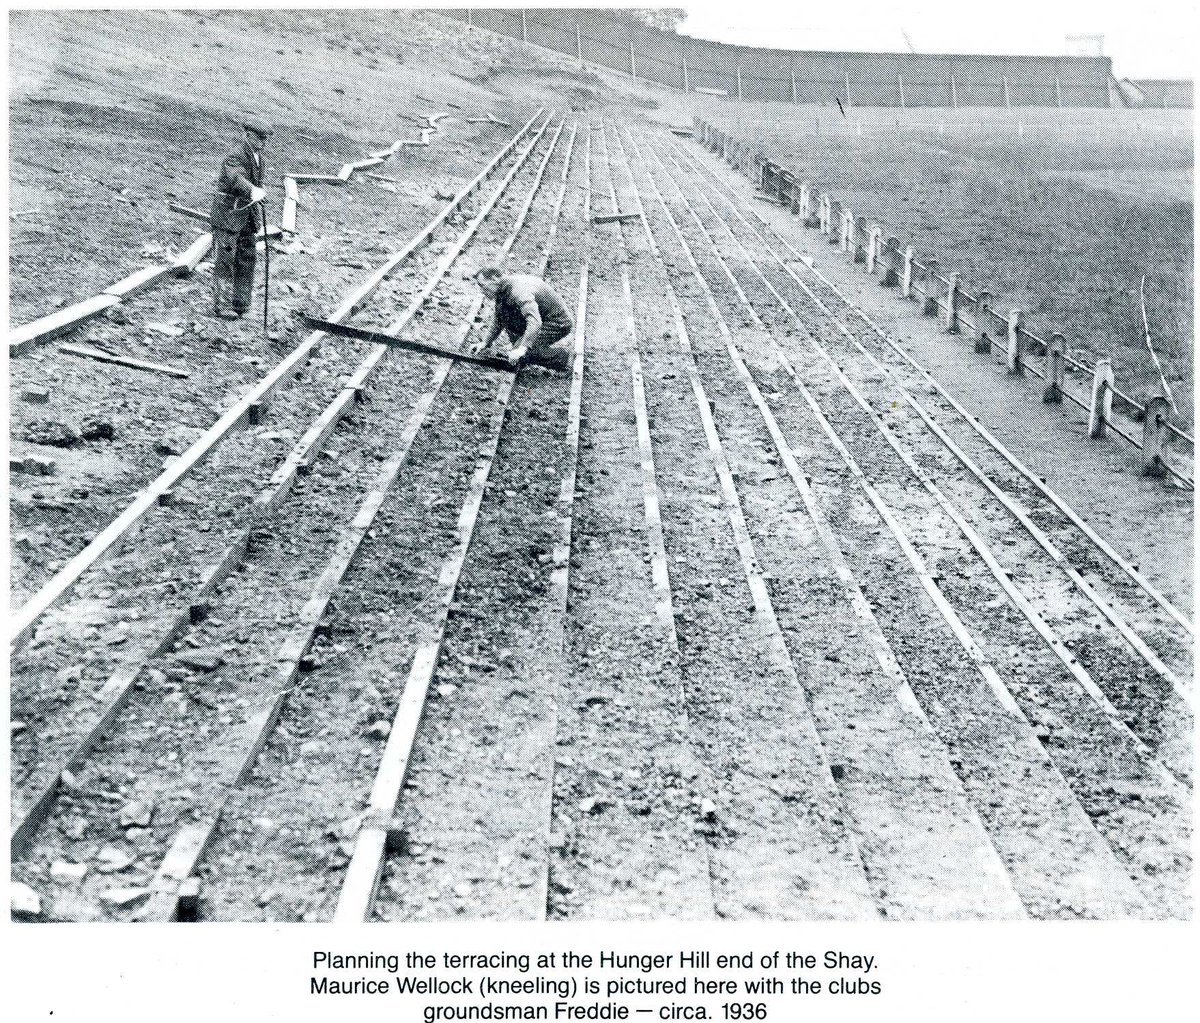 Halifax Town planning the terracing at The Shay, circa 1936. Photo taken from 'From Sandhall to the Shay' by Tony Thwaites.